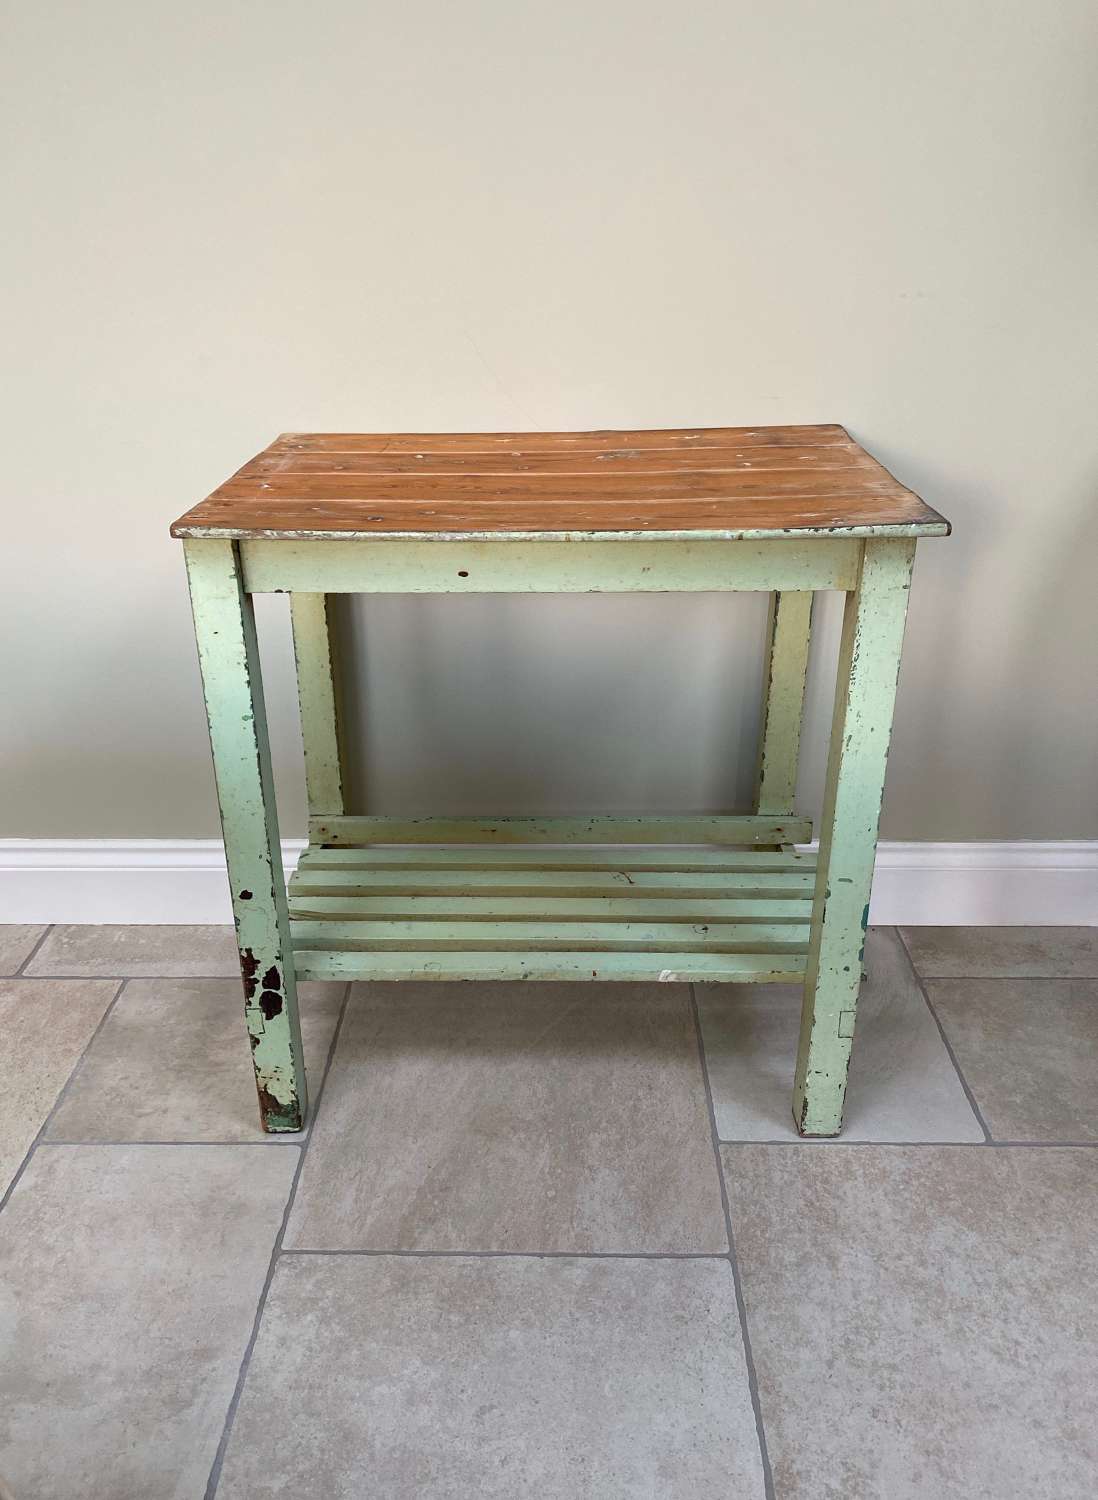 Early 20thC Painted Pine Table with Slatted Base Stretcher Shelf